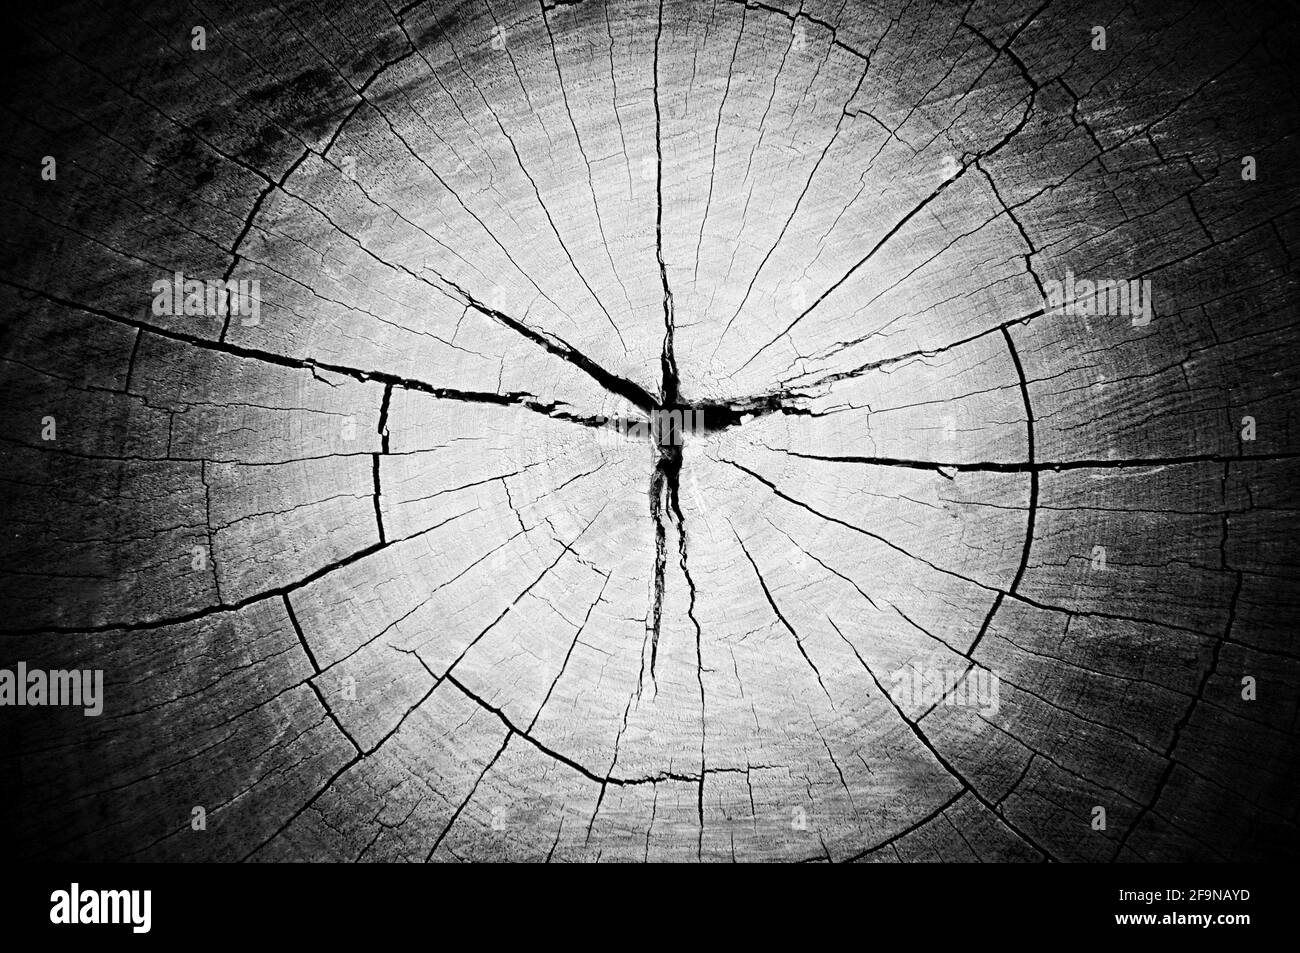 Dry old cracked tree stump texture with lomo effect Stock Photo